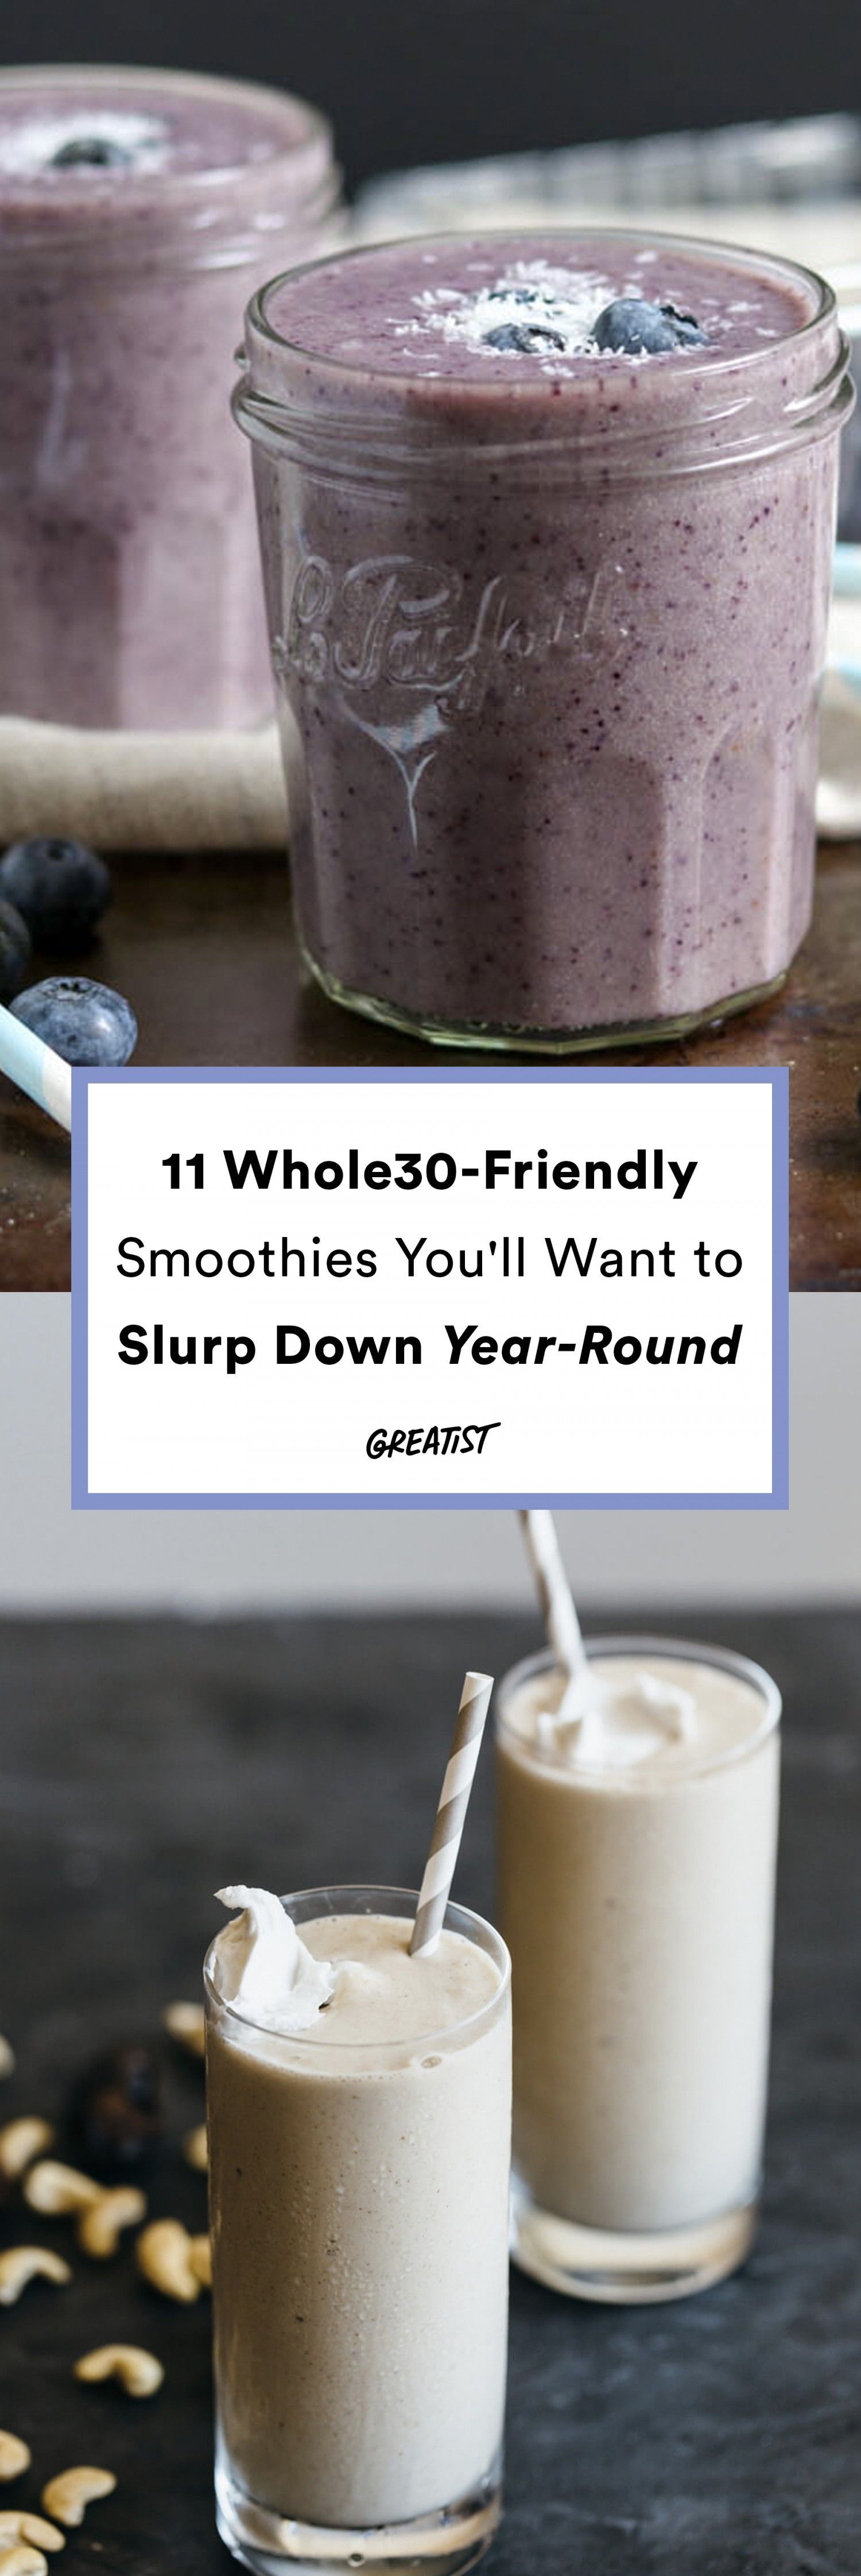 11 Whole30 Smoothies for When You're Sick of Making Eggs -   24 whole 30 rules
 ideas